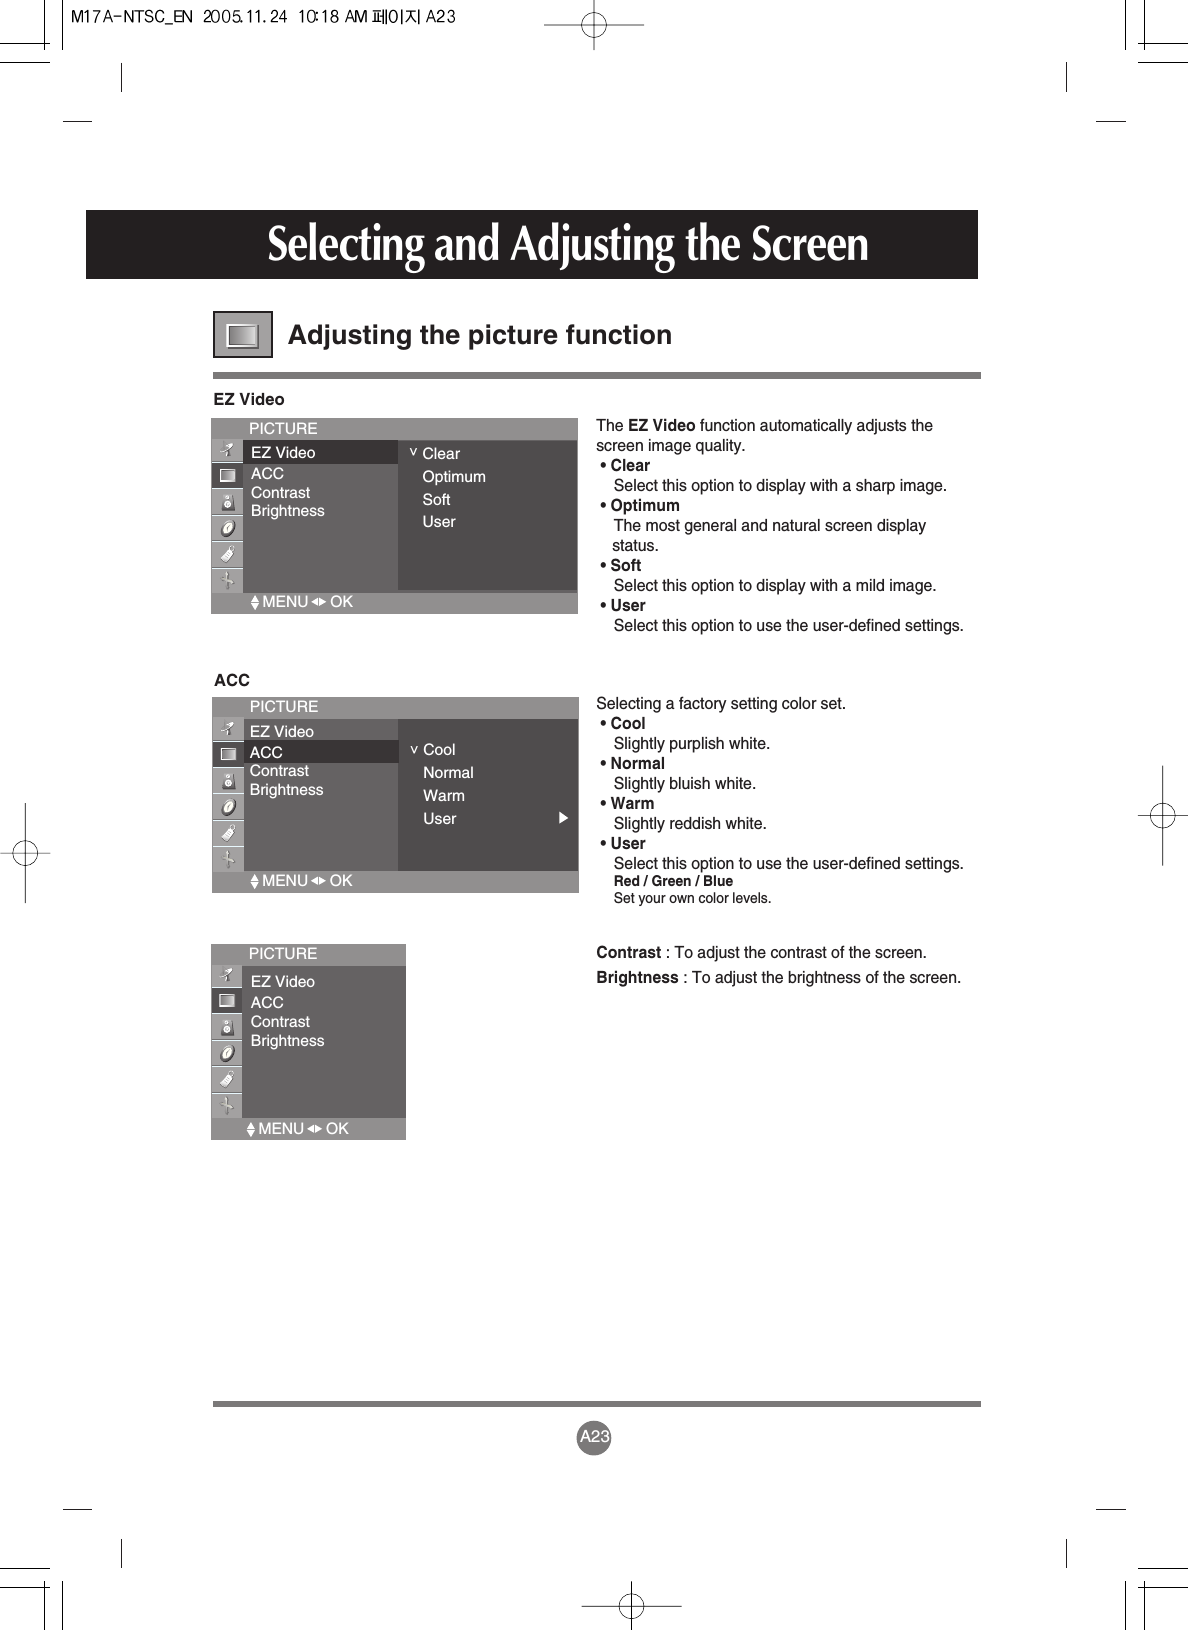 A23Selecting and Adjusting the ScreenAdjusting the picture function EZ VideoPICTUREEZ VideoACCContrastBrightness&lt;ClearOptimumSoftUserThe EZ Video function automatically adjusts thescreen image quality. • ClearSelect this option to display with a sharp image. • OptimumThe most general and natural screen displaystatus.• SoftSelect this option to display with a mild image.• UserSelect this option to use the user-defined settings.ACCPICTUREEZ VideoACCContrastBrightness&lt;CoolNormalWarmUserSelecting a factory setting color set. • CoolSlightly purplish white.• NormalSlightly bluish white.• WarmSlightly reddish white. • UserSelect this option to use the user-defined settings.Red / Green / BlueSet your own color levels.Contrast : To adjust the contrast of the screen.Brightness : To adjust the brightness of the screen.PICTUREEZ VideoACCContrastBrightnessMENU     OK  MENU     OK  MENU     OK  